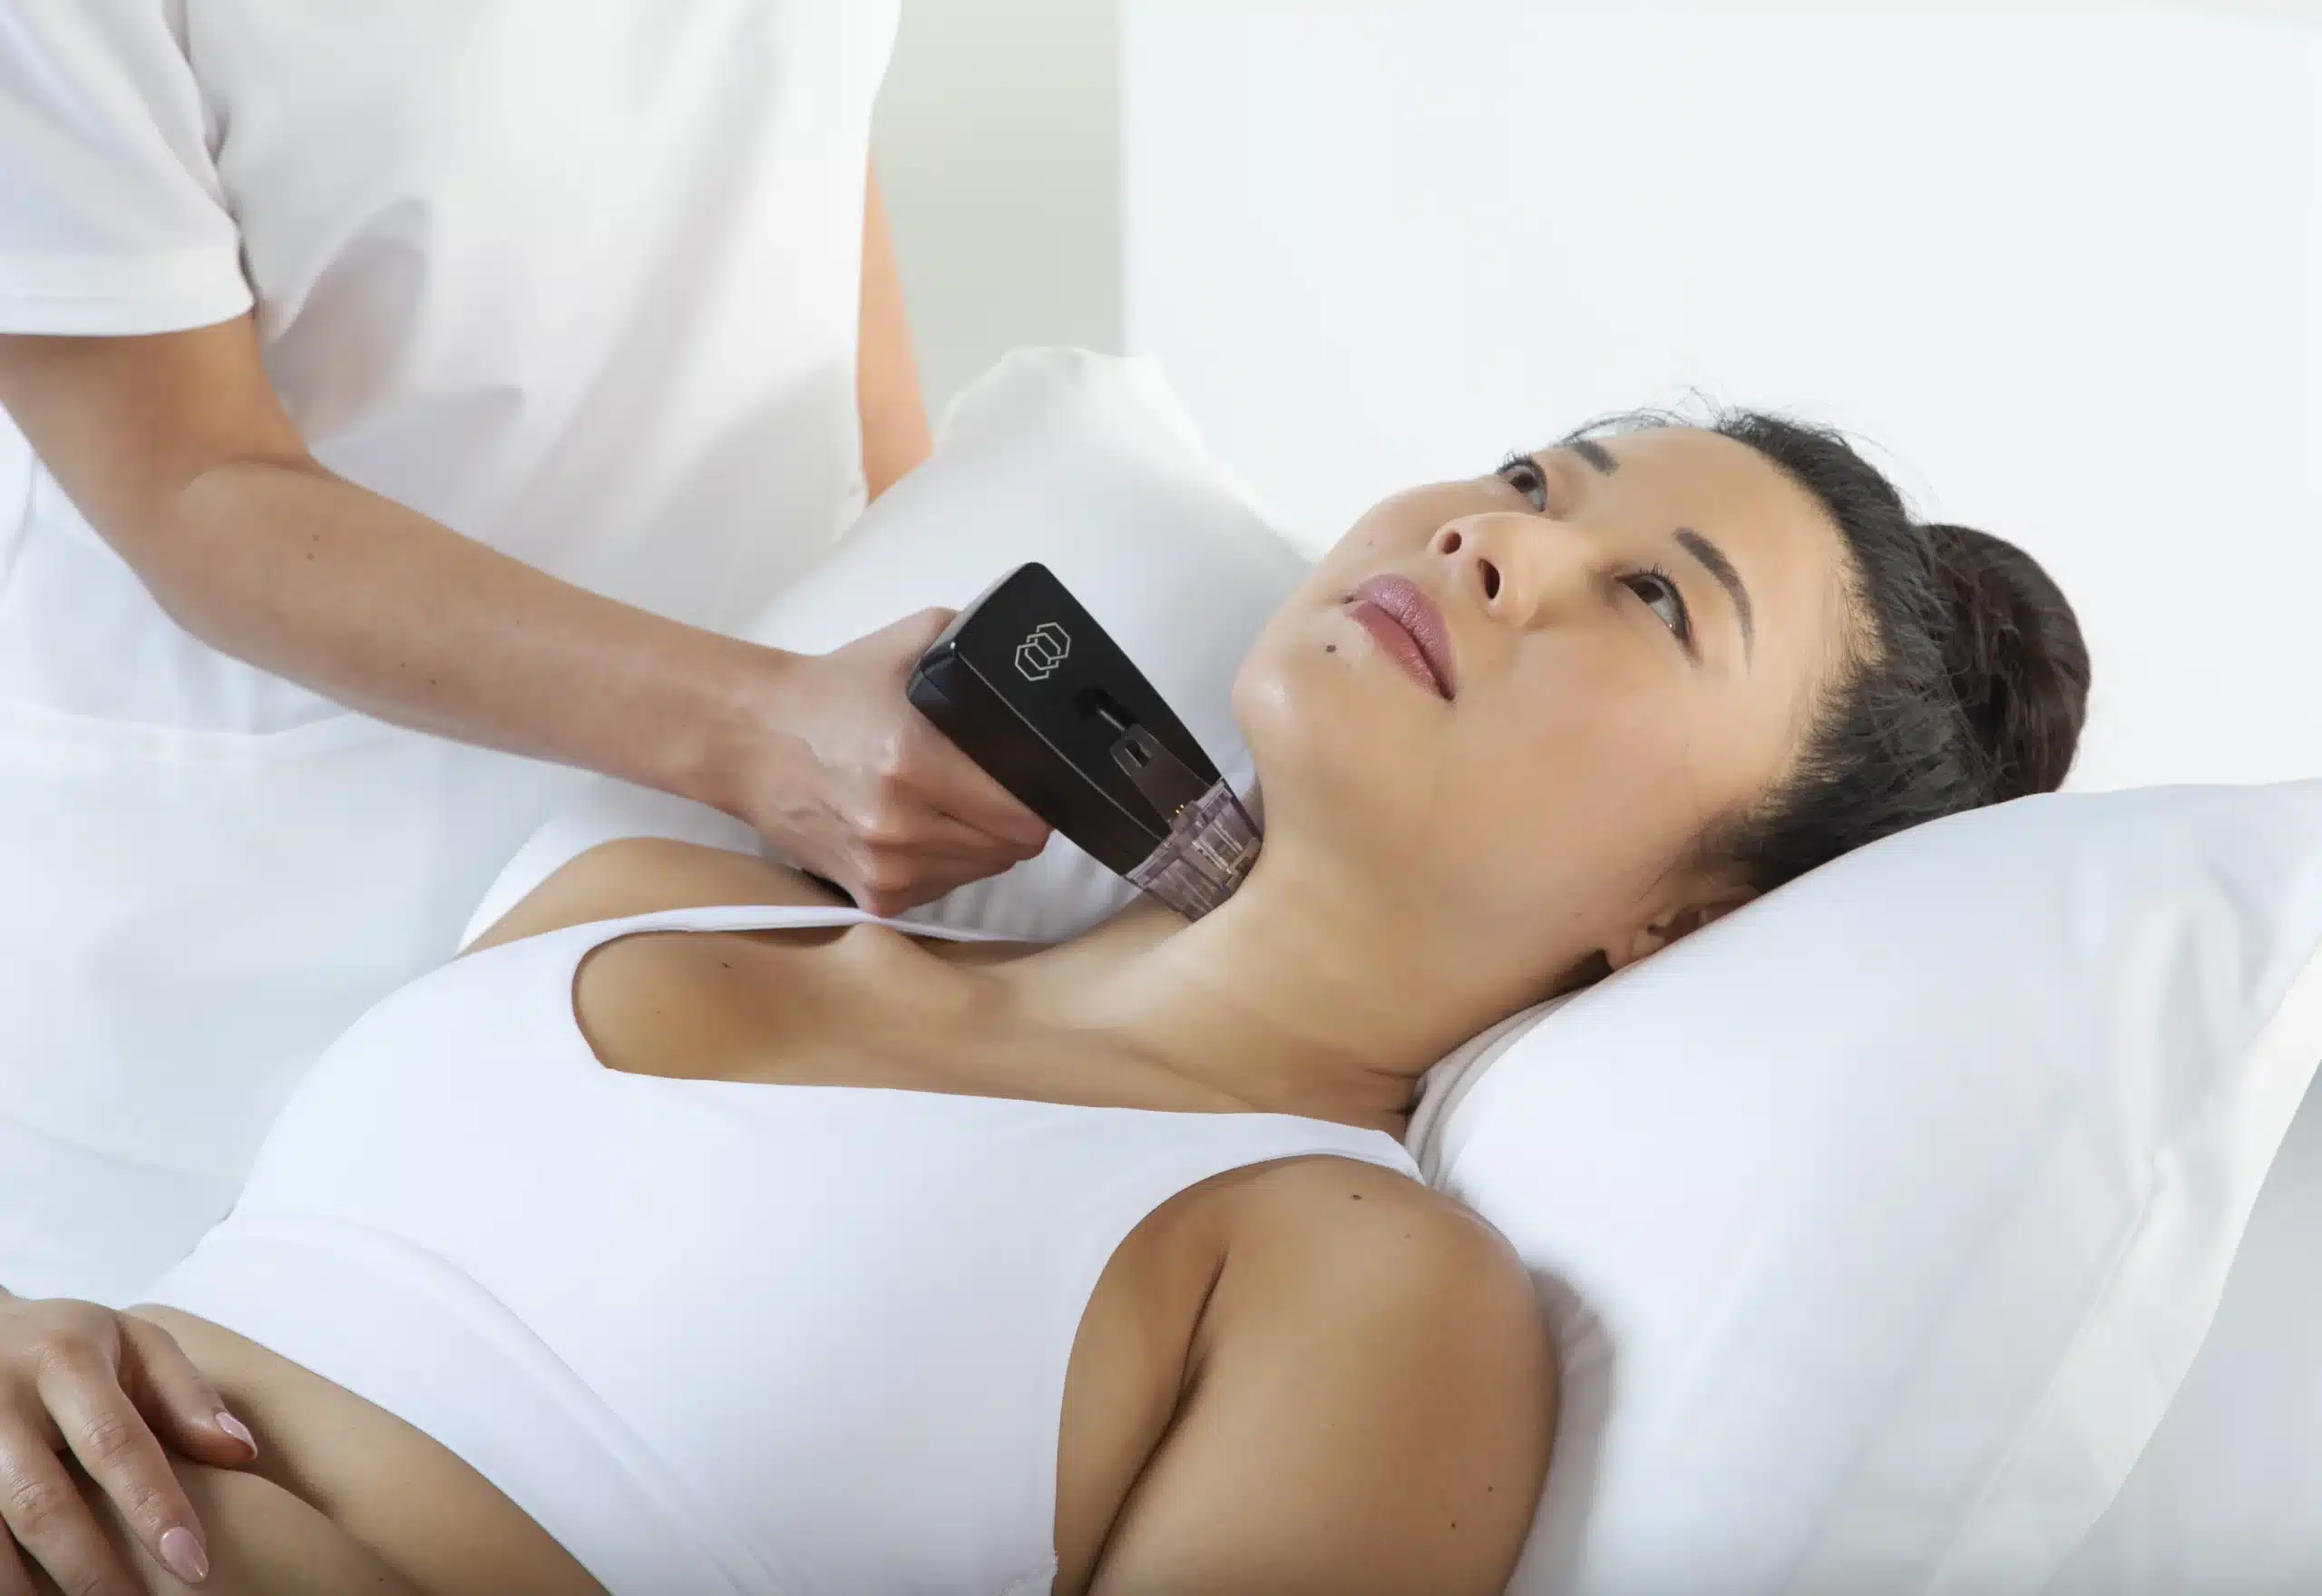 A woman getting her neck treated by a med spa provider using the Morpheus8 hand piece.